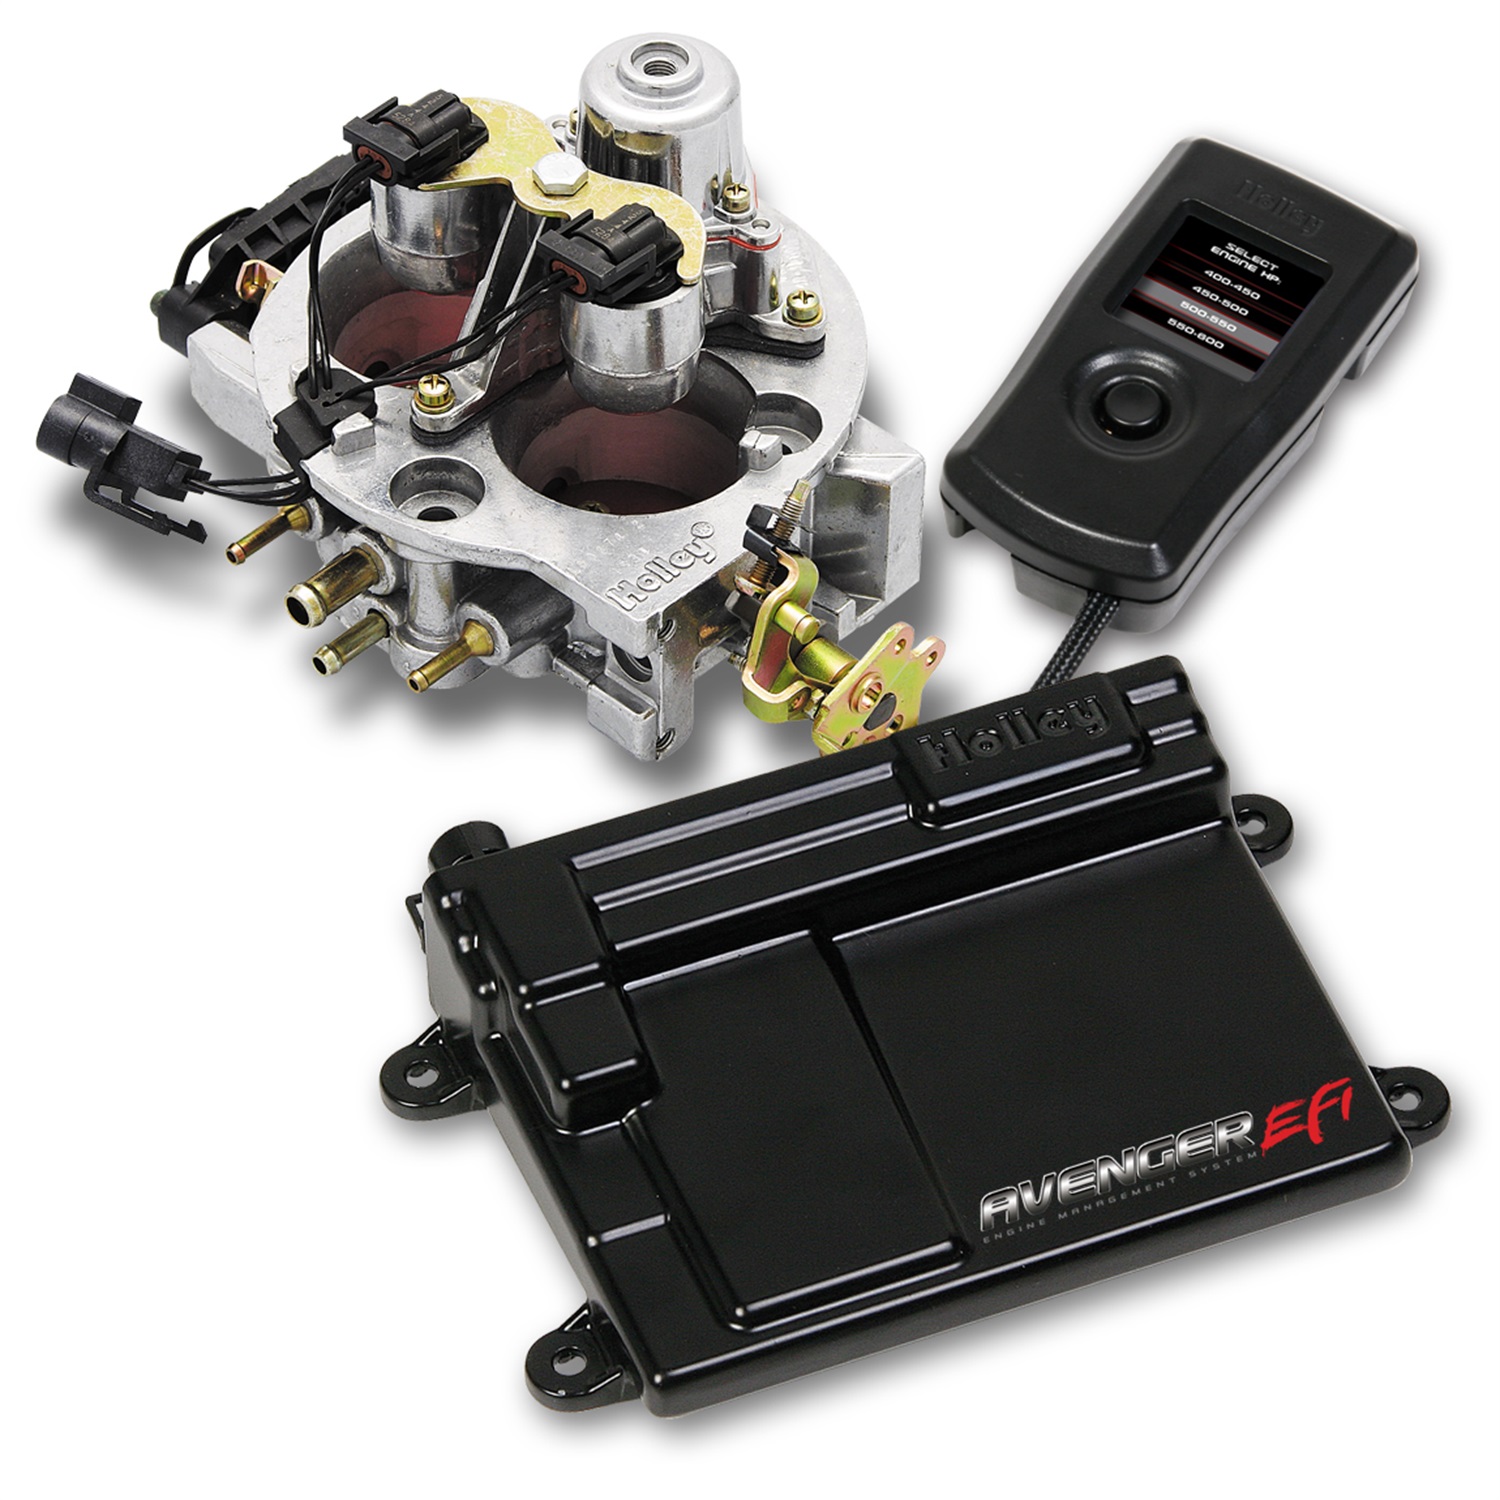 Holley Performance Holley Performance 550-200 Avenger EFI Throttle Body Fuel Injection System